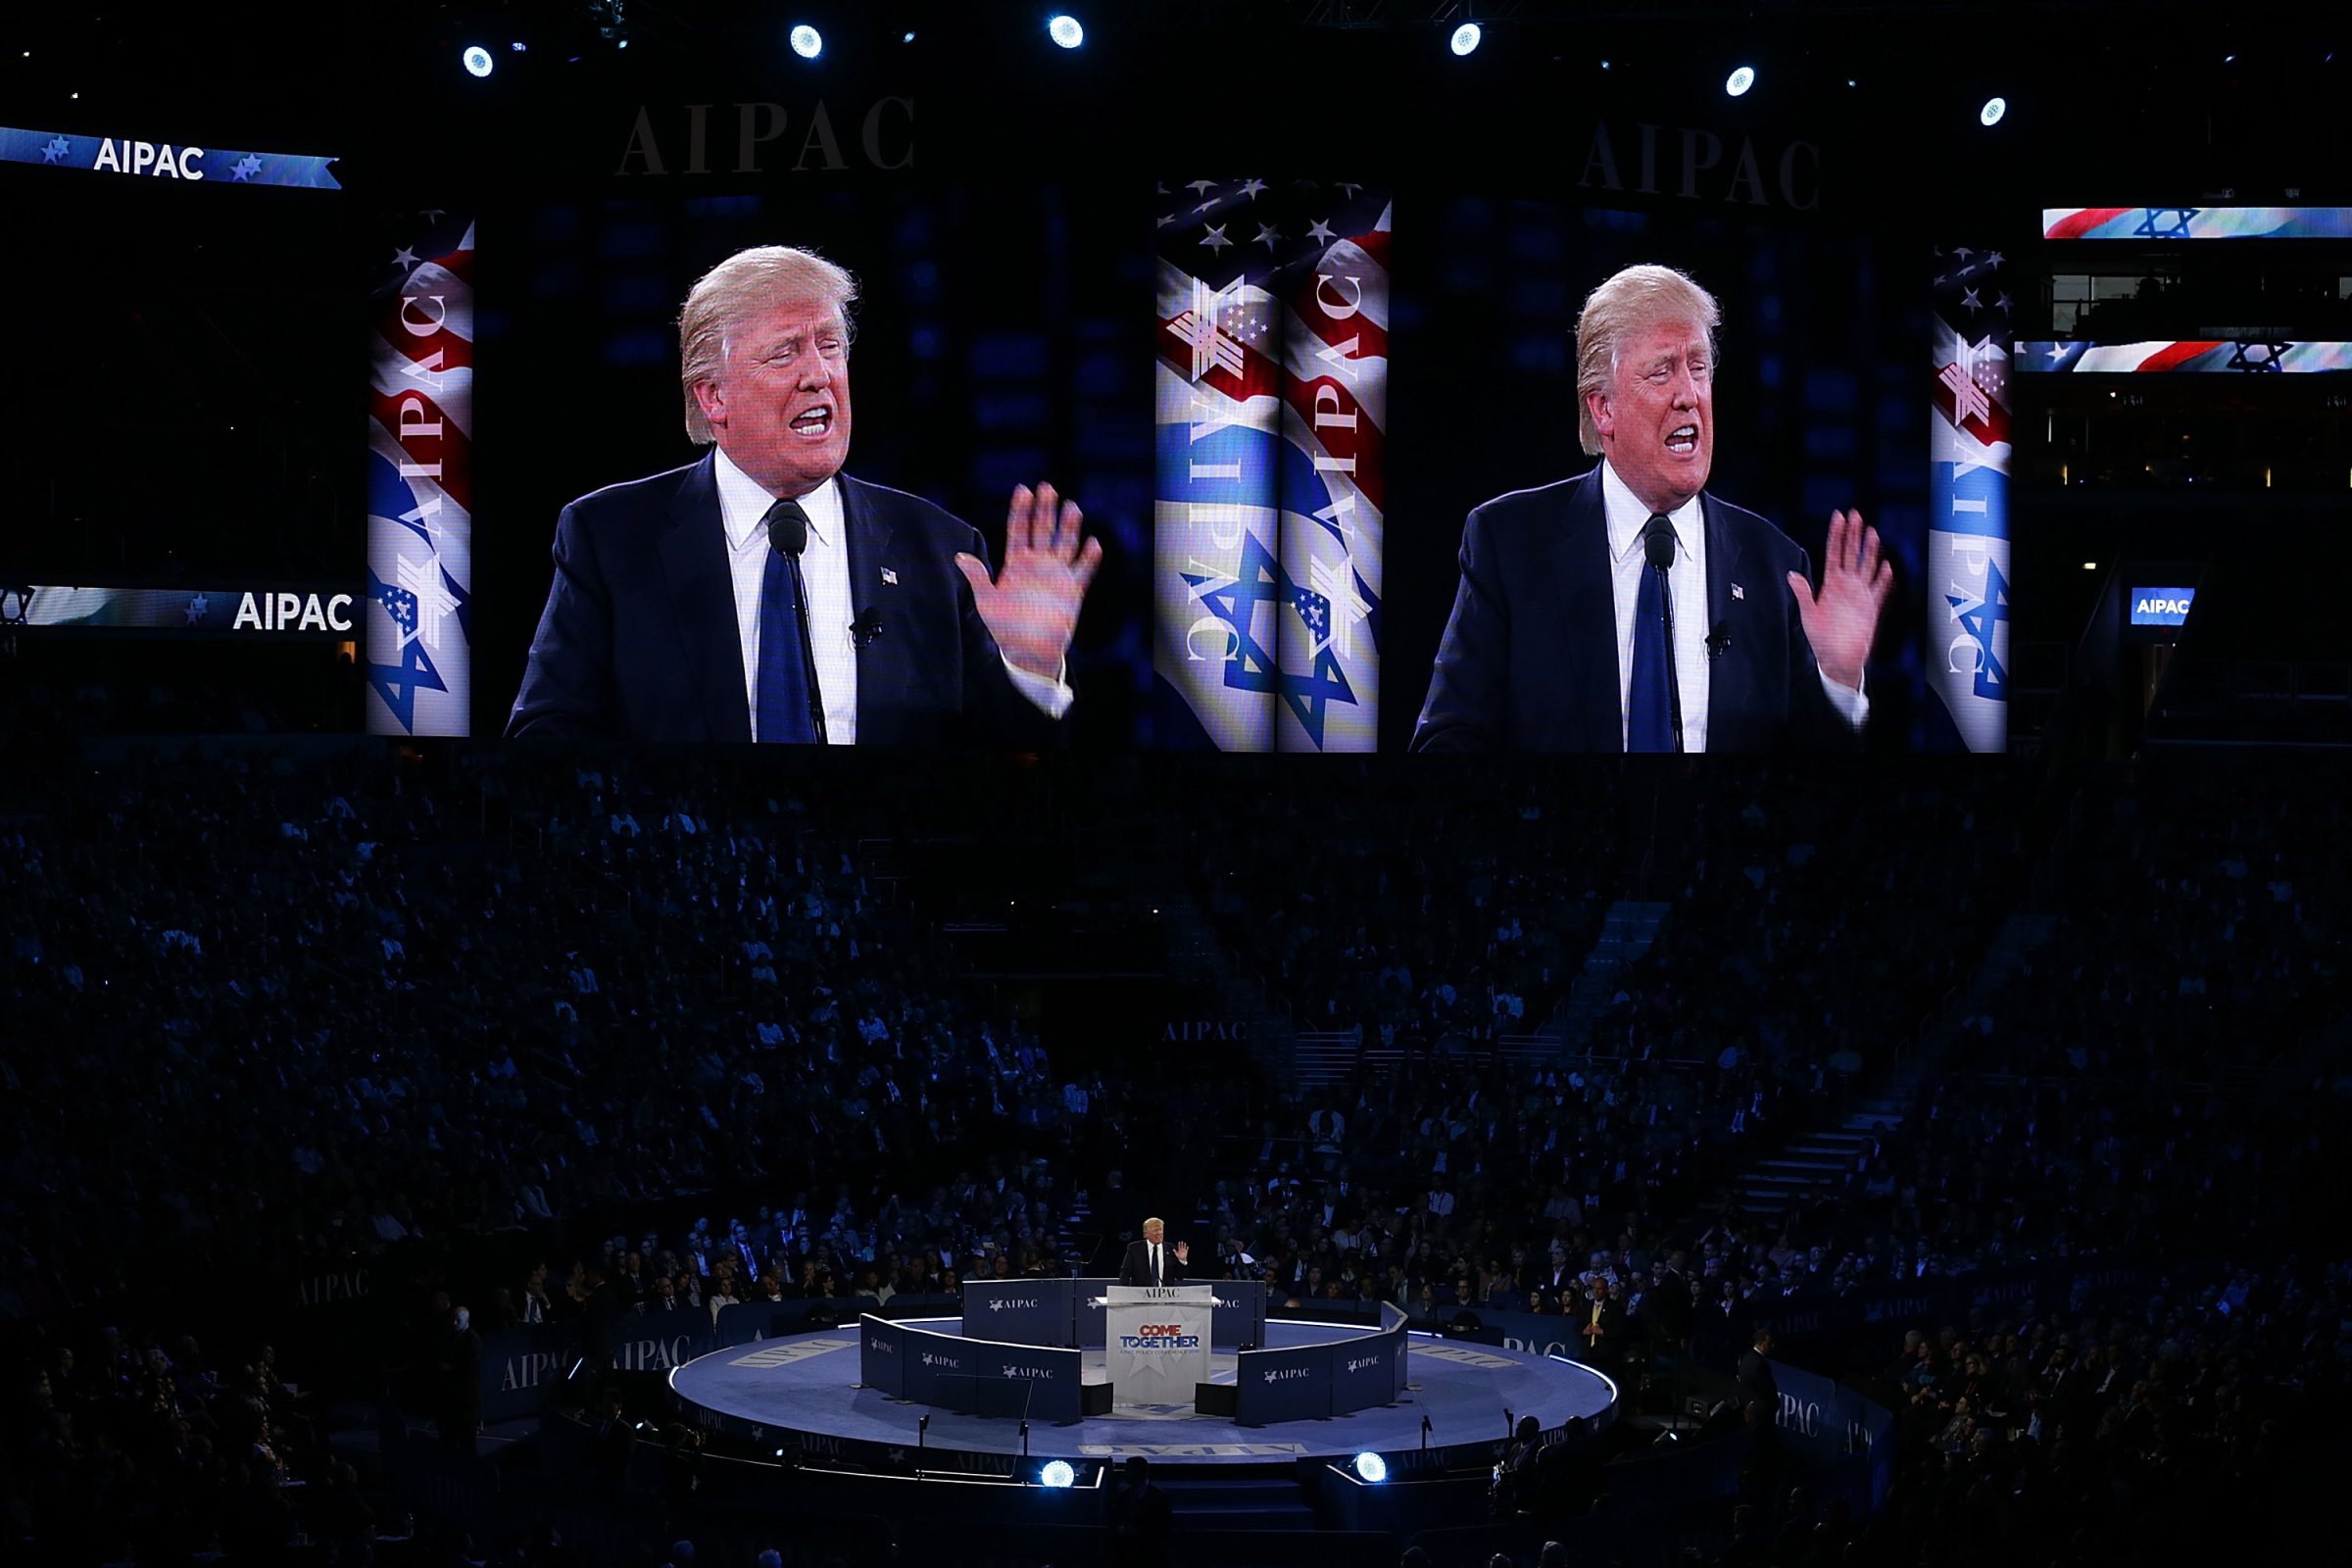 Republican presidential candidate Donald Trump addresses the annual policy conference of the American Israel Public Affairs Committee (AIPAC) in Washington, D.C., on March 21, 2016.